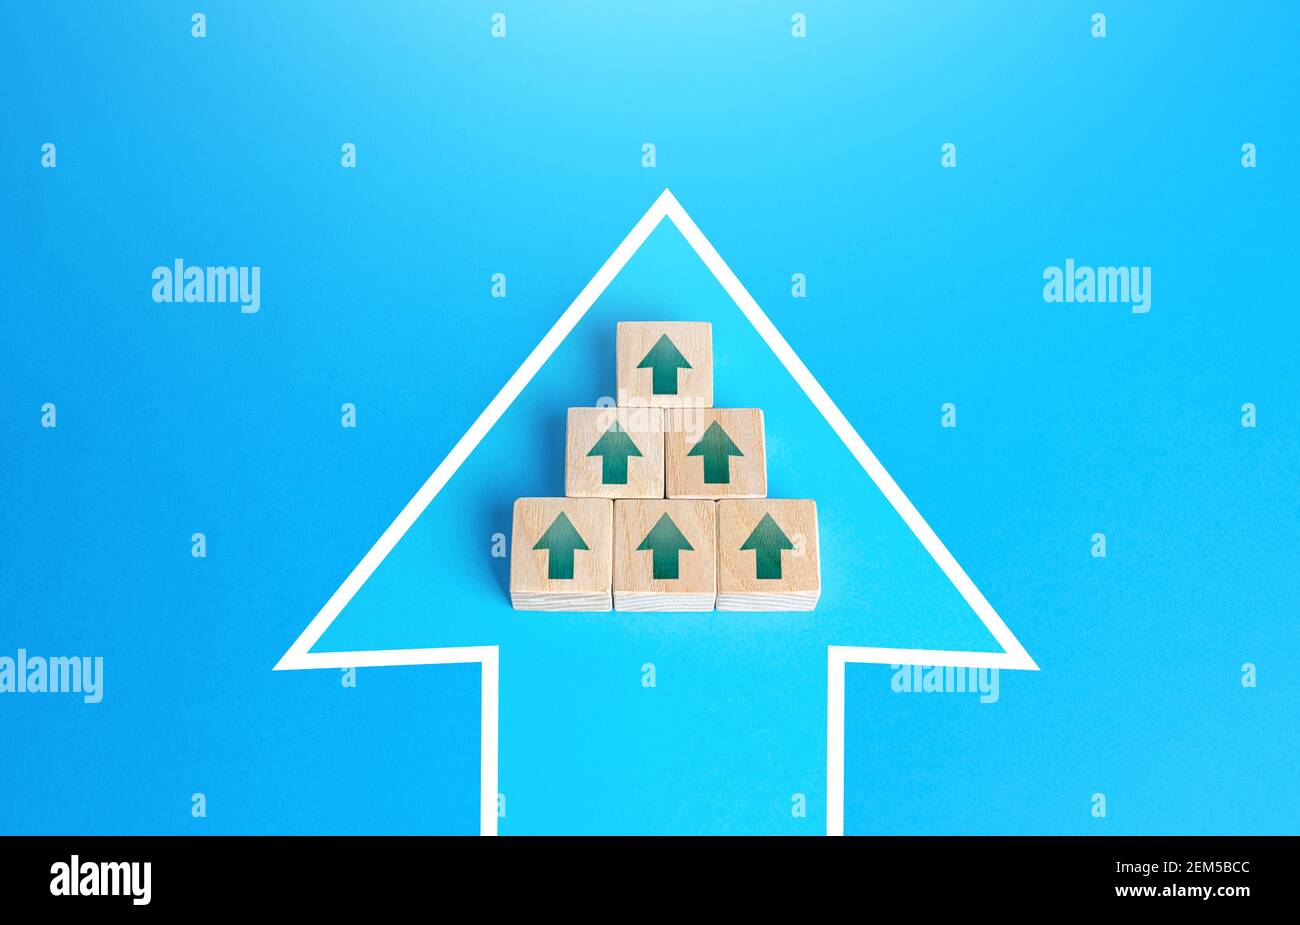 Blocks with unidirectional arrows united in a single move arrow. Directing all efforts and resources to achieve the goal and solve an urgent problem. Stock Photo